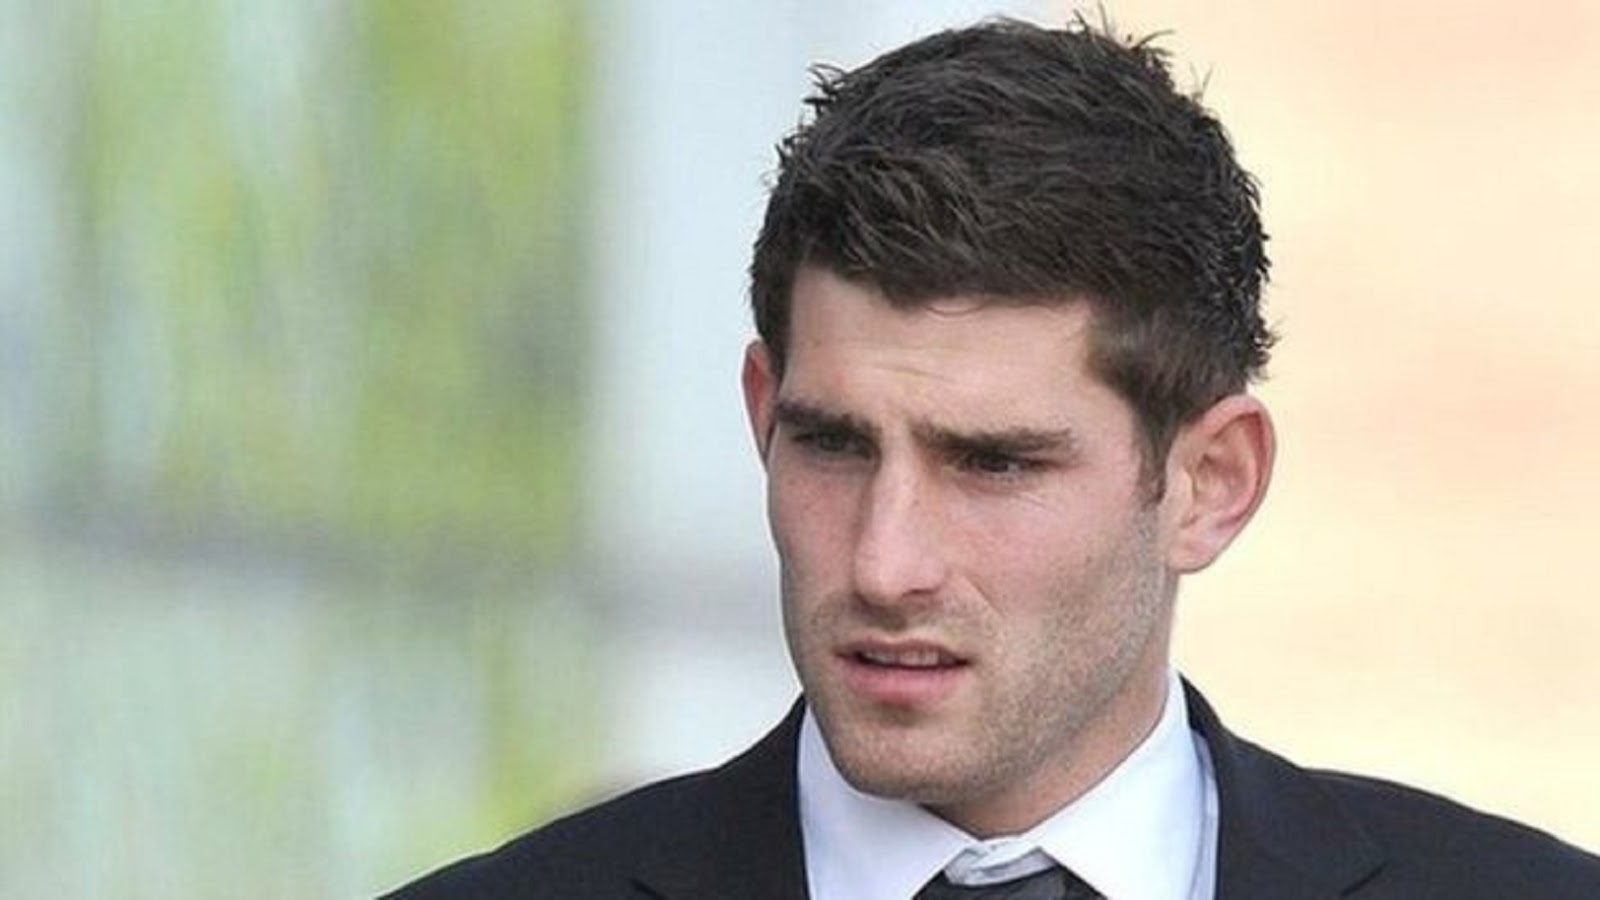 CHED EVANS 2